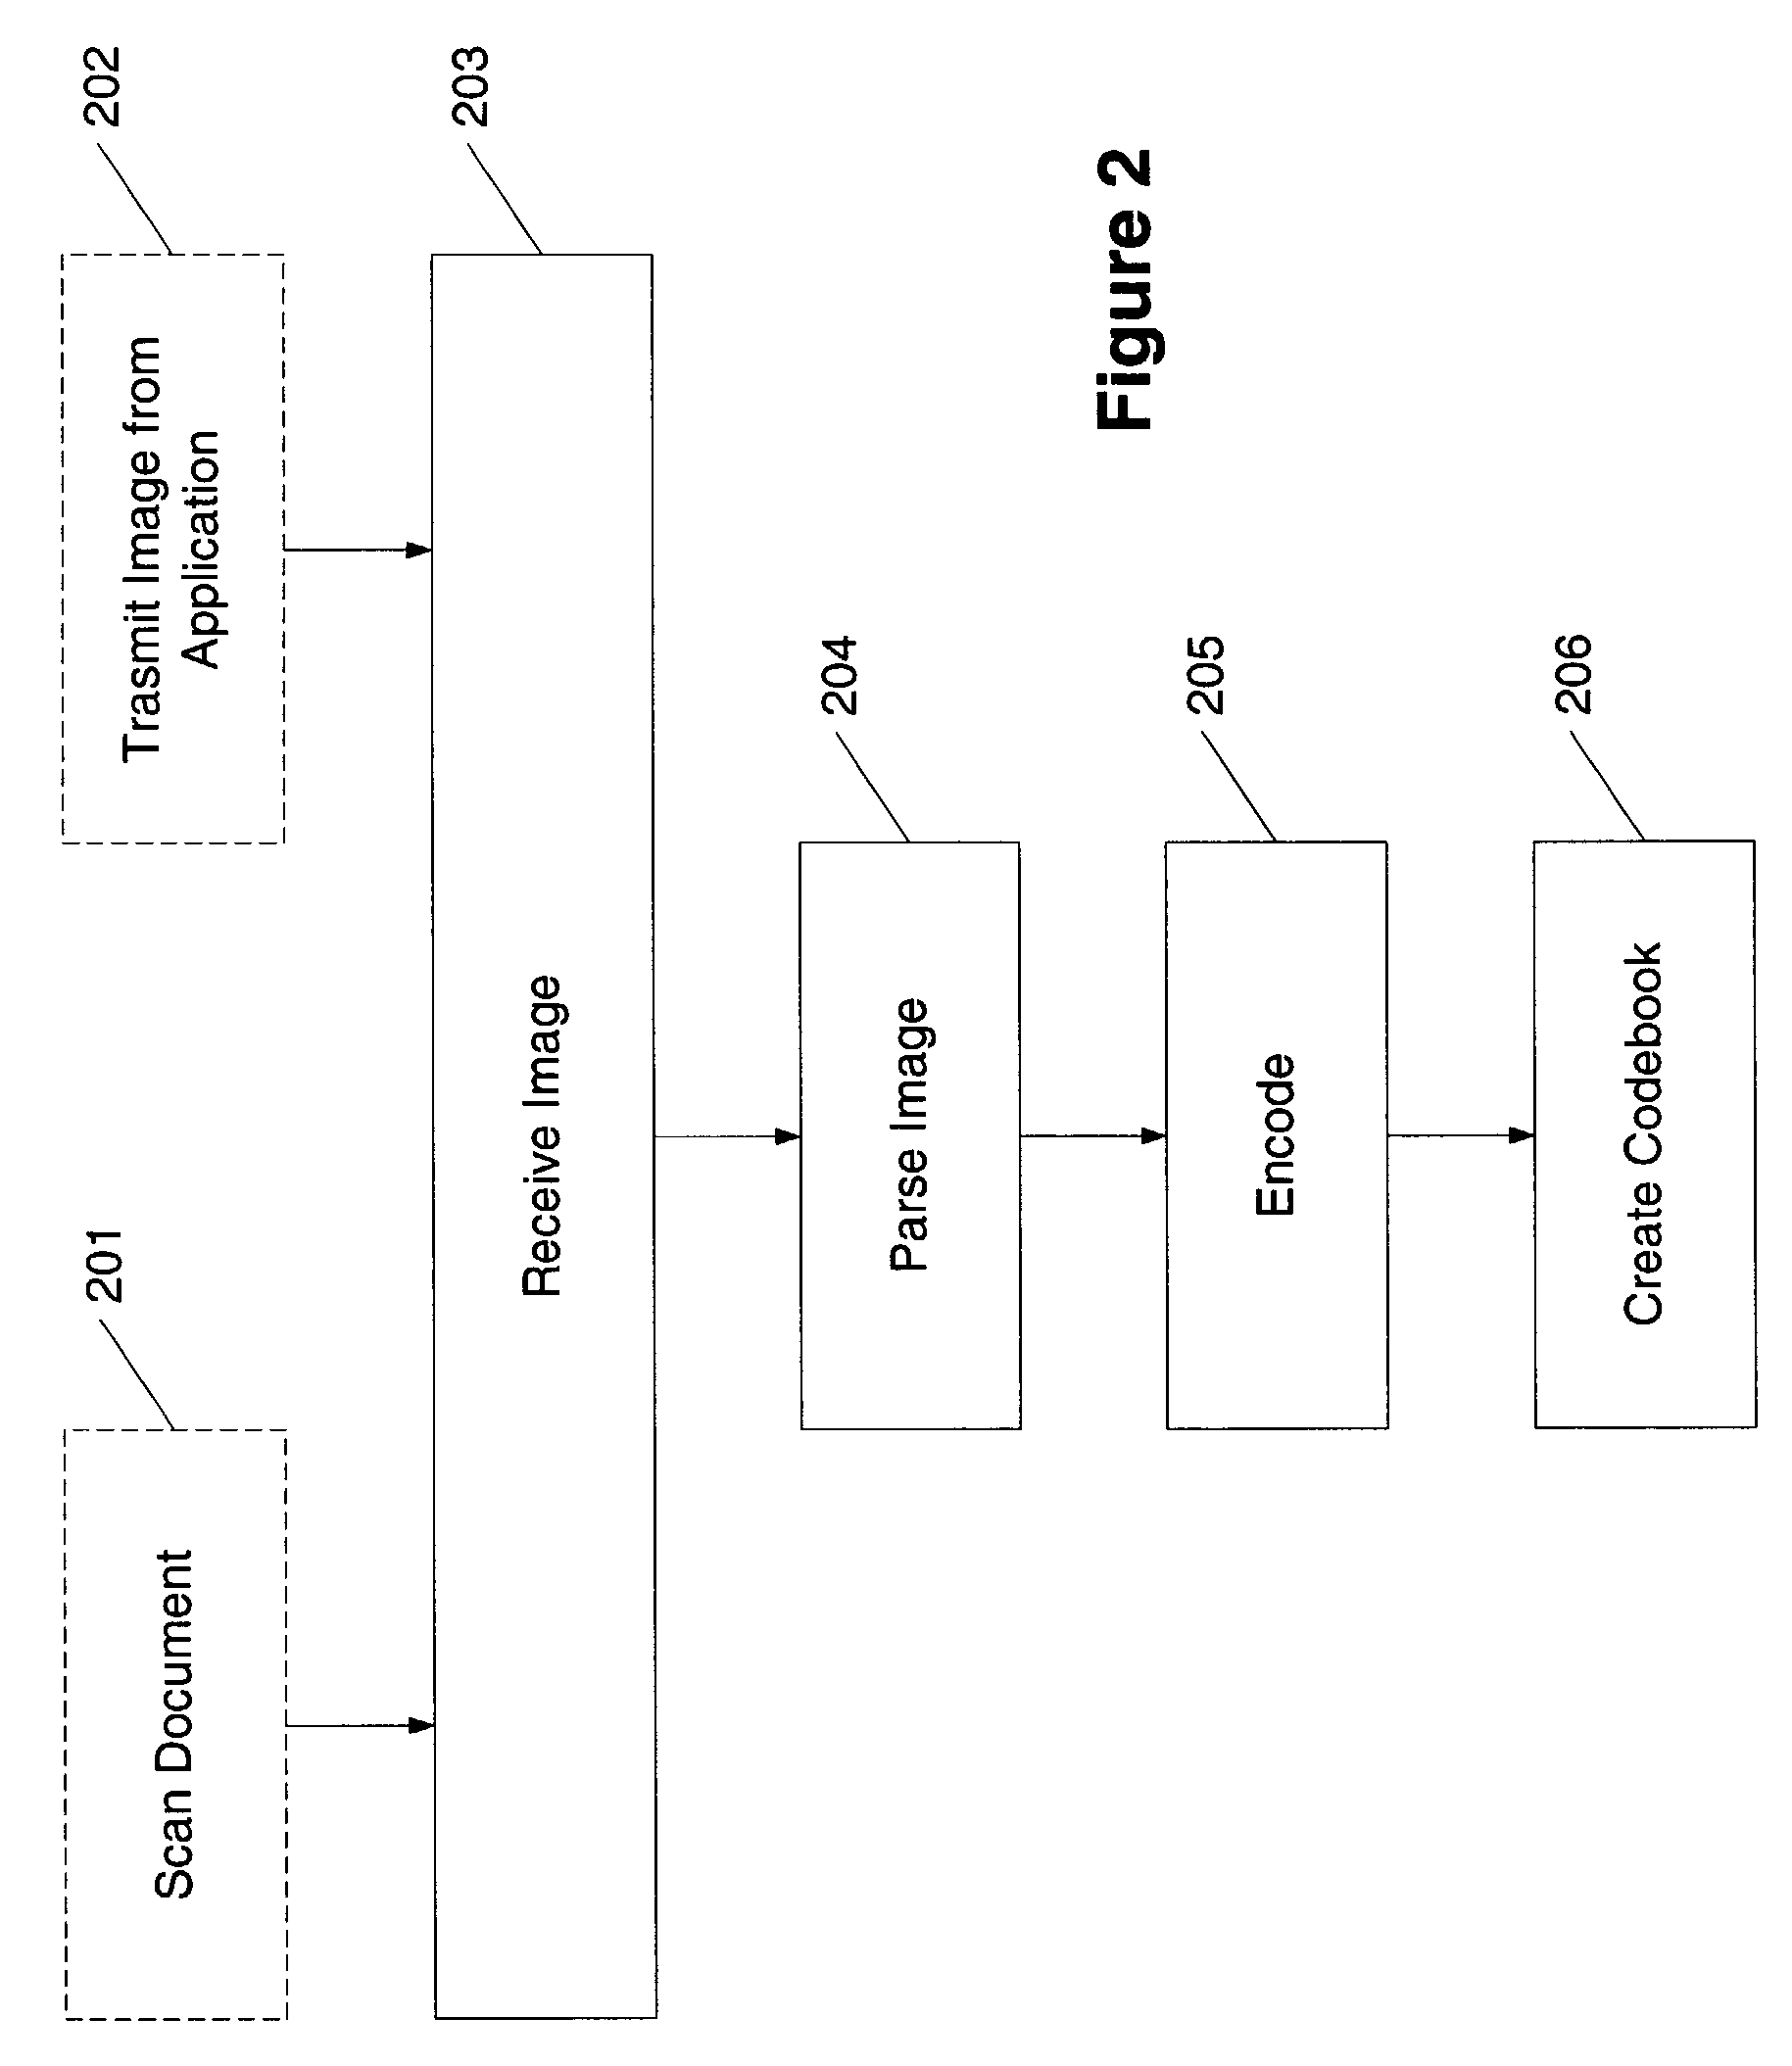 Passive embedded interaction code